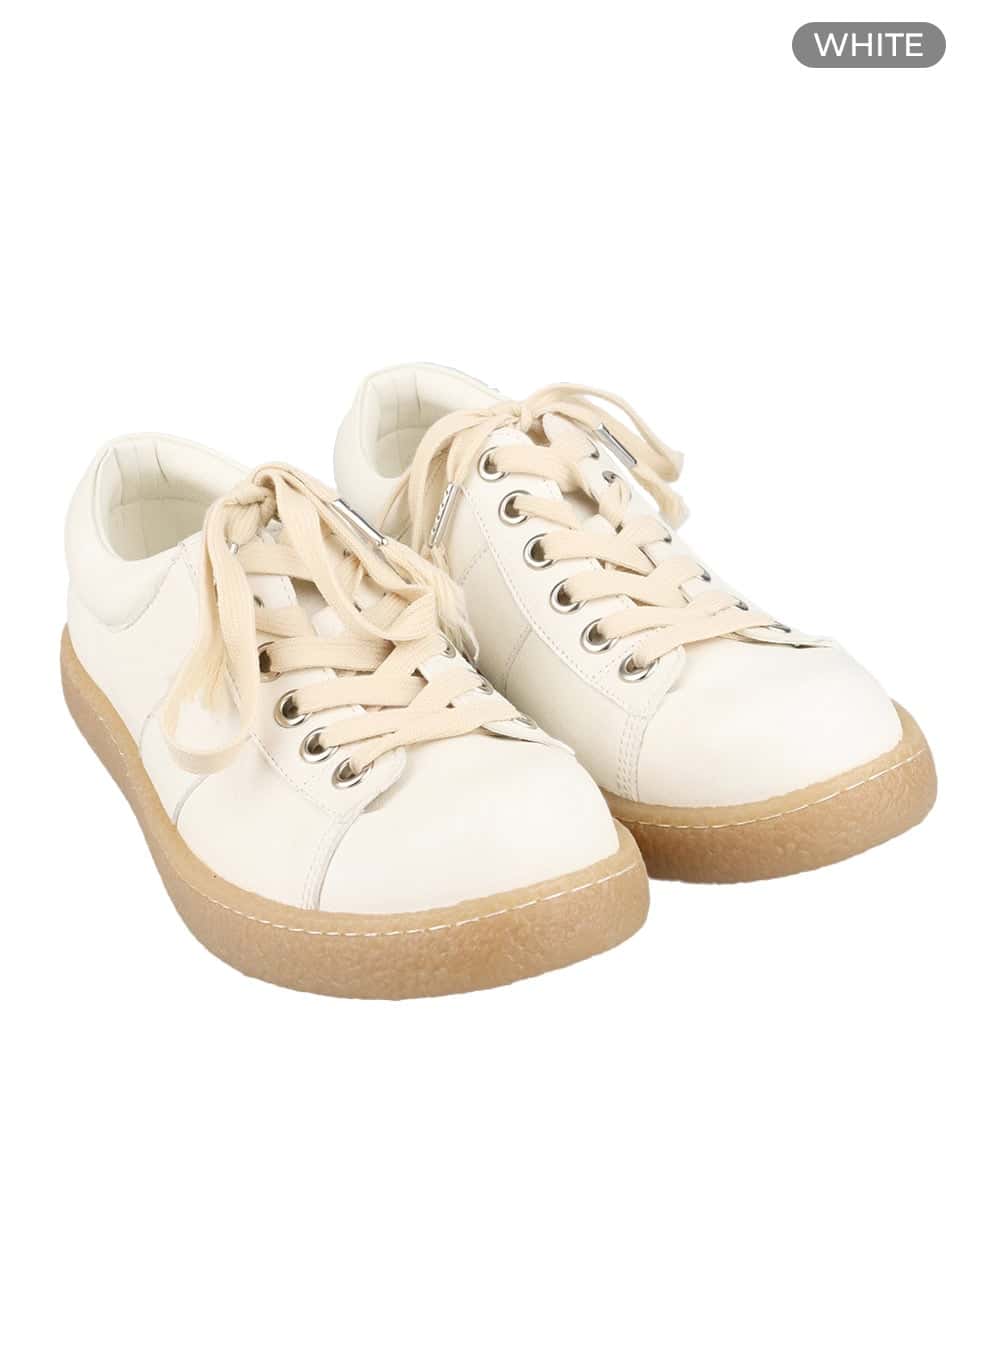 mens-faux-leather-stitched-sneakers-iy410 / White